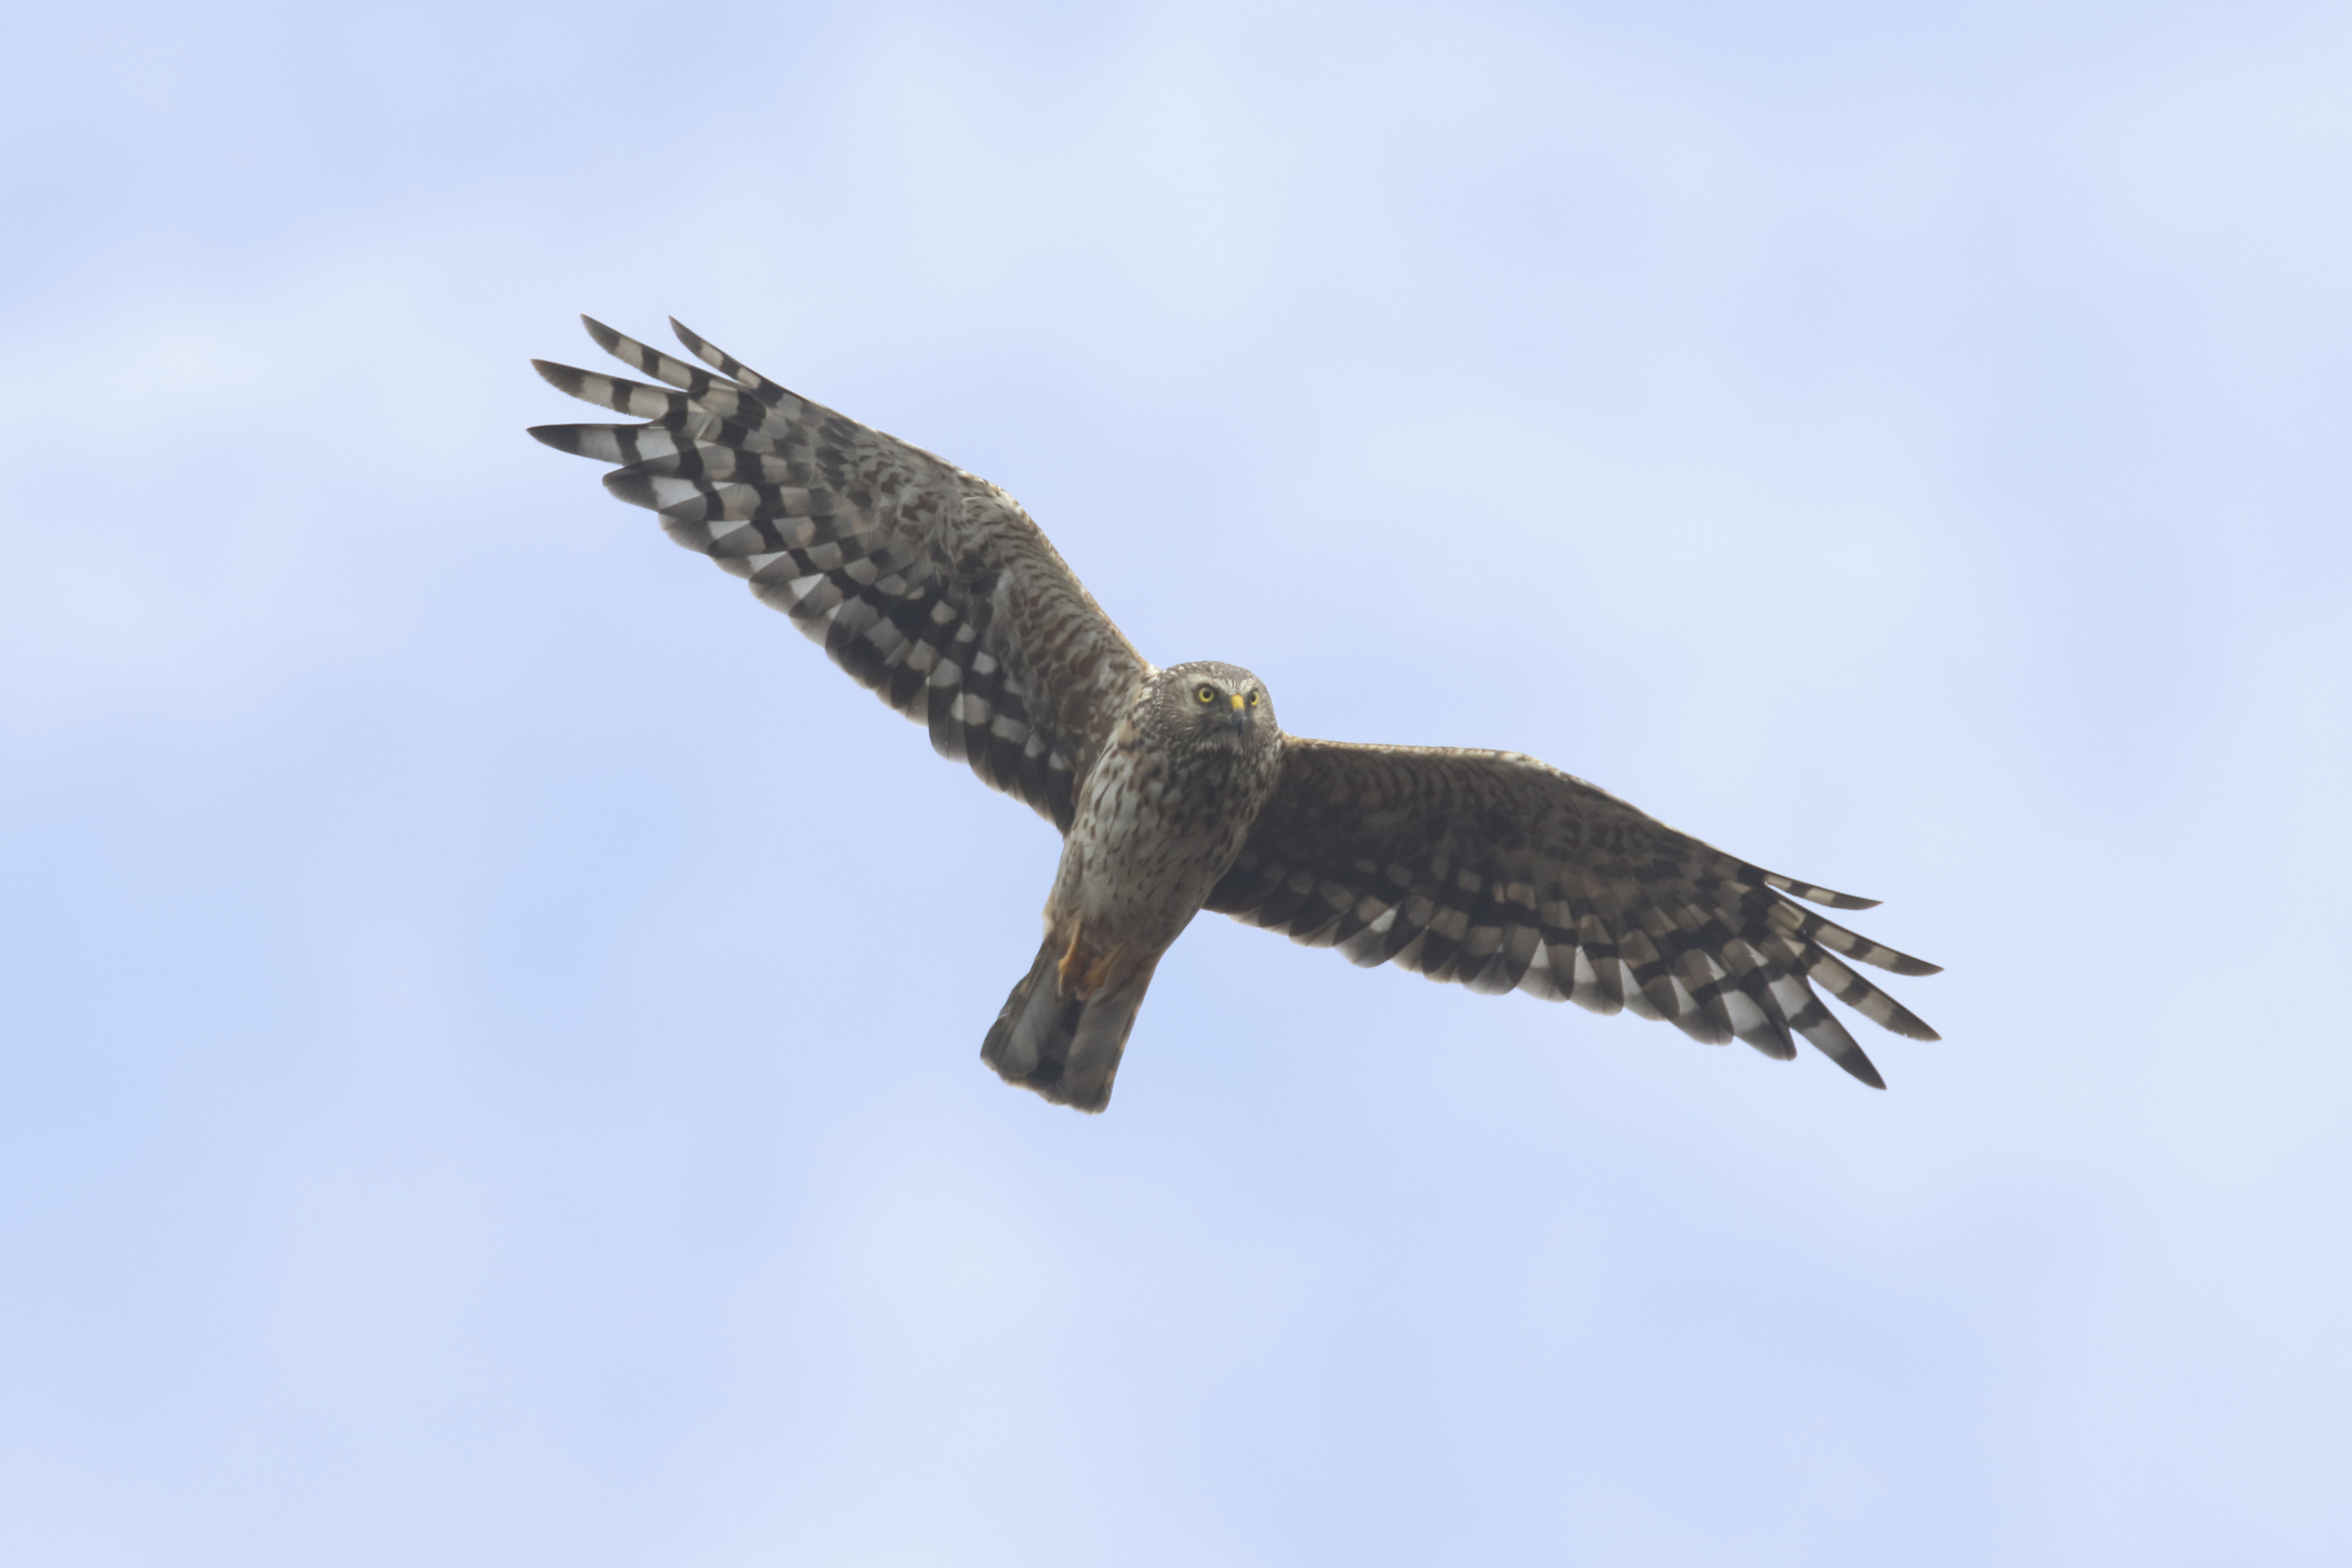 Birds of Prey in the UK | On a Wing and a Prayer - The RSPB